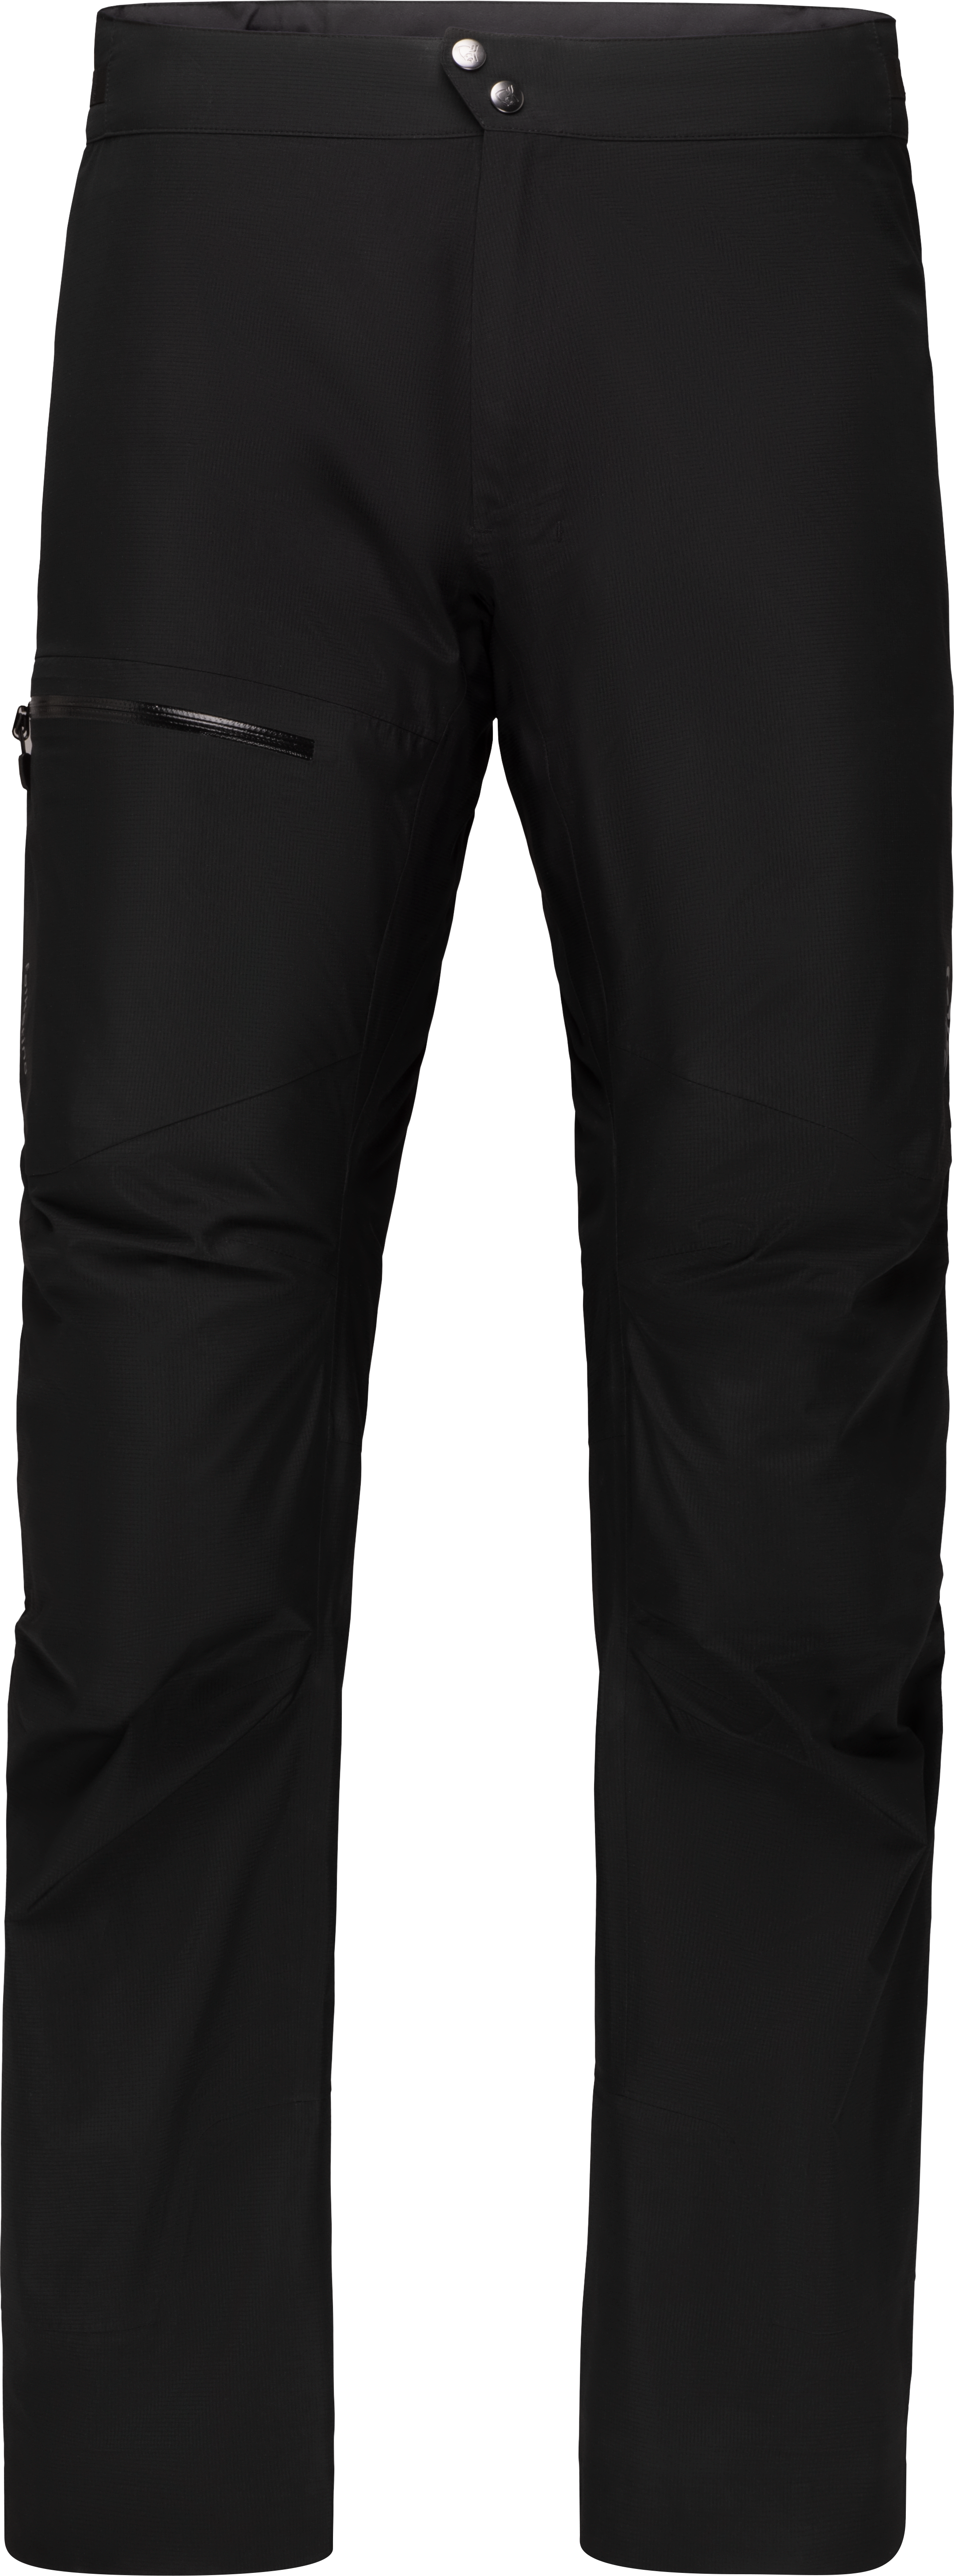 Buy Norrøna Men's Falketind Gore-Tex Paclite Pants from Outnorth